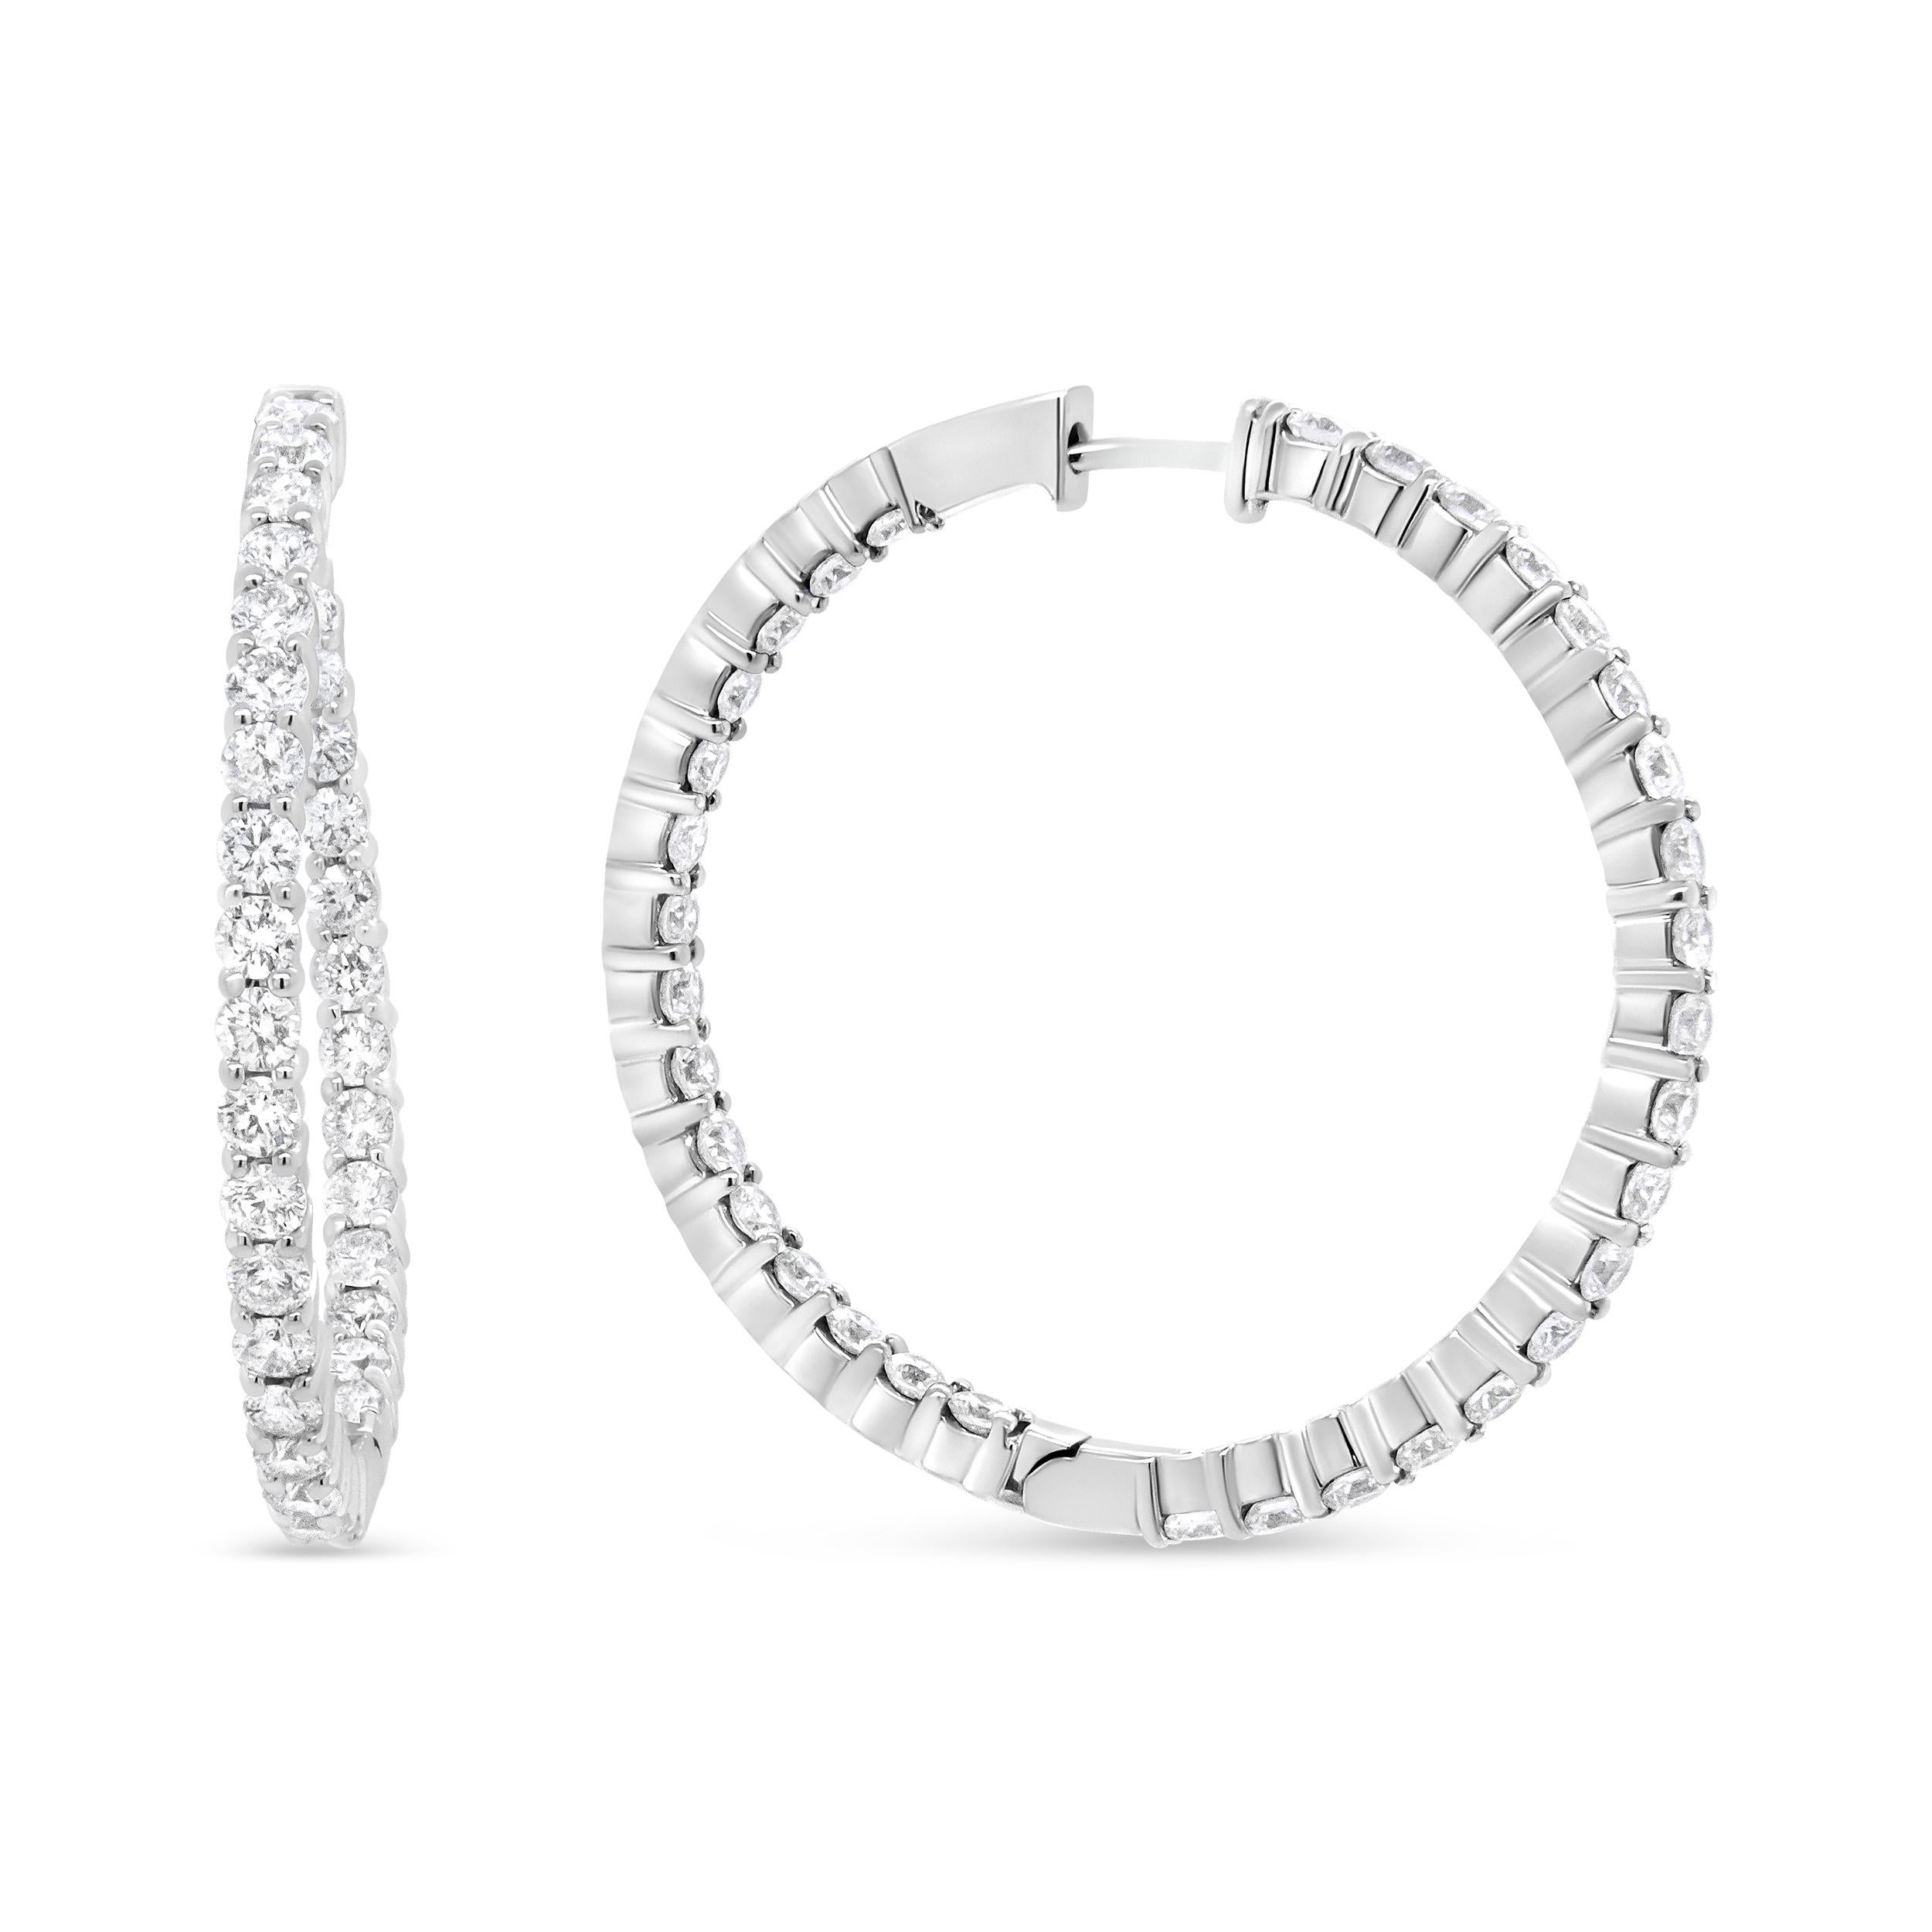 Strike a pose in these gorgeous inside-outside hoop earrings that radiate the luminosity of sparkling prong-set round diamonds. The curved silhouette and the inside-outside design of these hoops ensures maximum diamond exposure. These diamonds